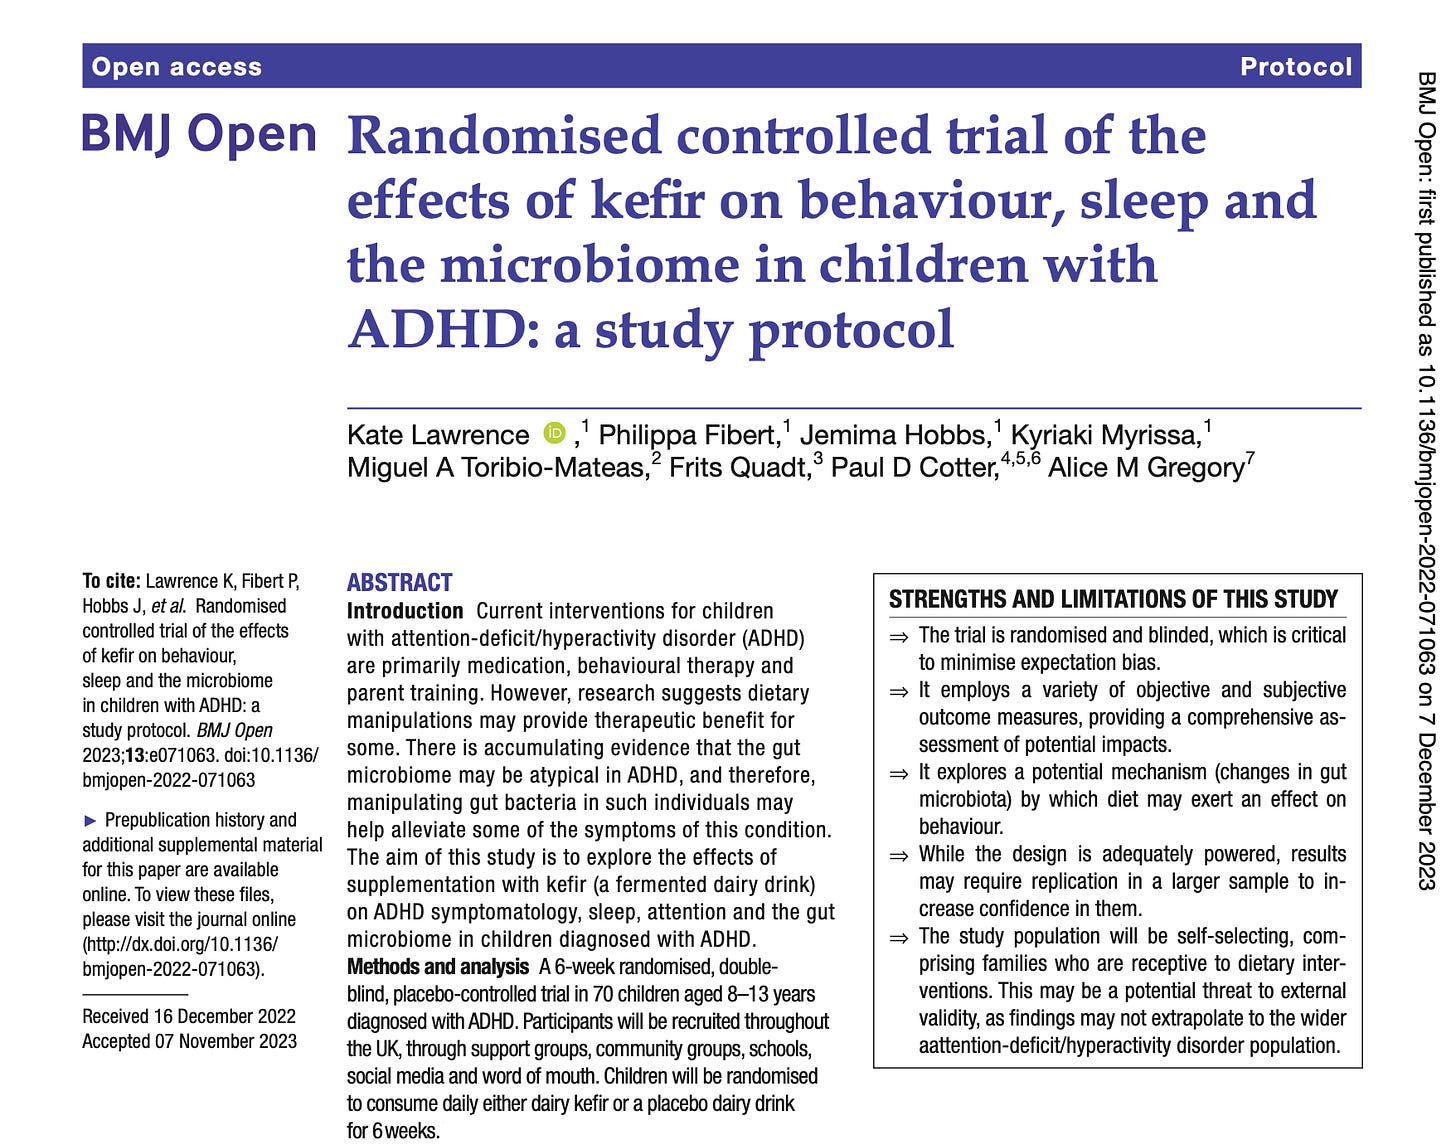 The image shows a published study protocol from the journal BMJ Open. The title reads "Randomised controlled trial of the effects of kefir on behaviour, sleep and the microbiome in children with ADHD: a study protocol". Authors include Kate Lawrence, Philippa Fibert, Jemima Hobbs, Kyriaki Myrissa, Miguel A Toribio-Mateas, Frits Quadt, Paul D Cotter, and Alice M Gregory. The abstract section introduces the study on ADHD and the potential benefits of dietary manipulations with kefir. It mentions the trial's design, participant recruitment, and the intervention involving kefir or a placebo dairy drink. Key strengths and limitations of the study are outlined, highlighting the trial's randomized and blinded design, the comprehensive nature of the outcome measures, and the exploration of dietary impact on gut microbiota behavior. Limitations include the self-selecting sample and the need for replication in a larger sample to increase confidence in the results. Publication history notes indicate the paper was received on 16 December 2022 and accepted on 07 November 2023.